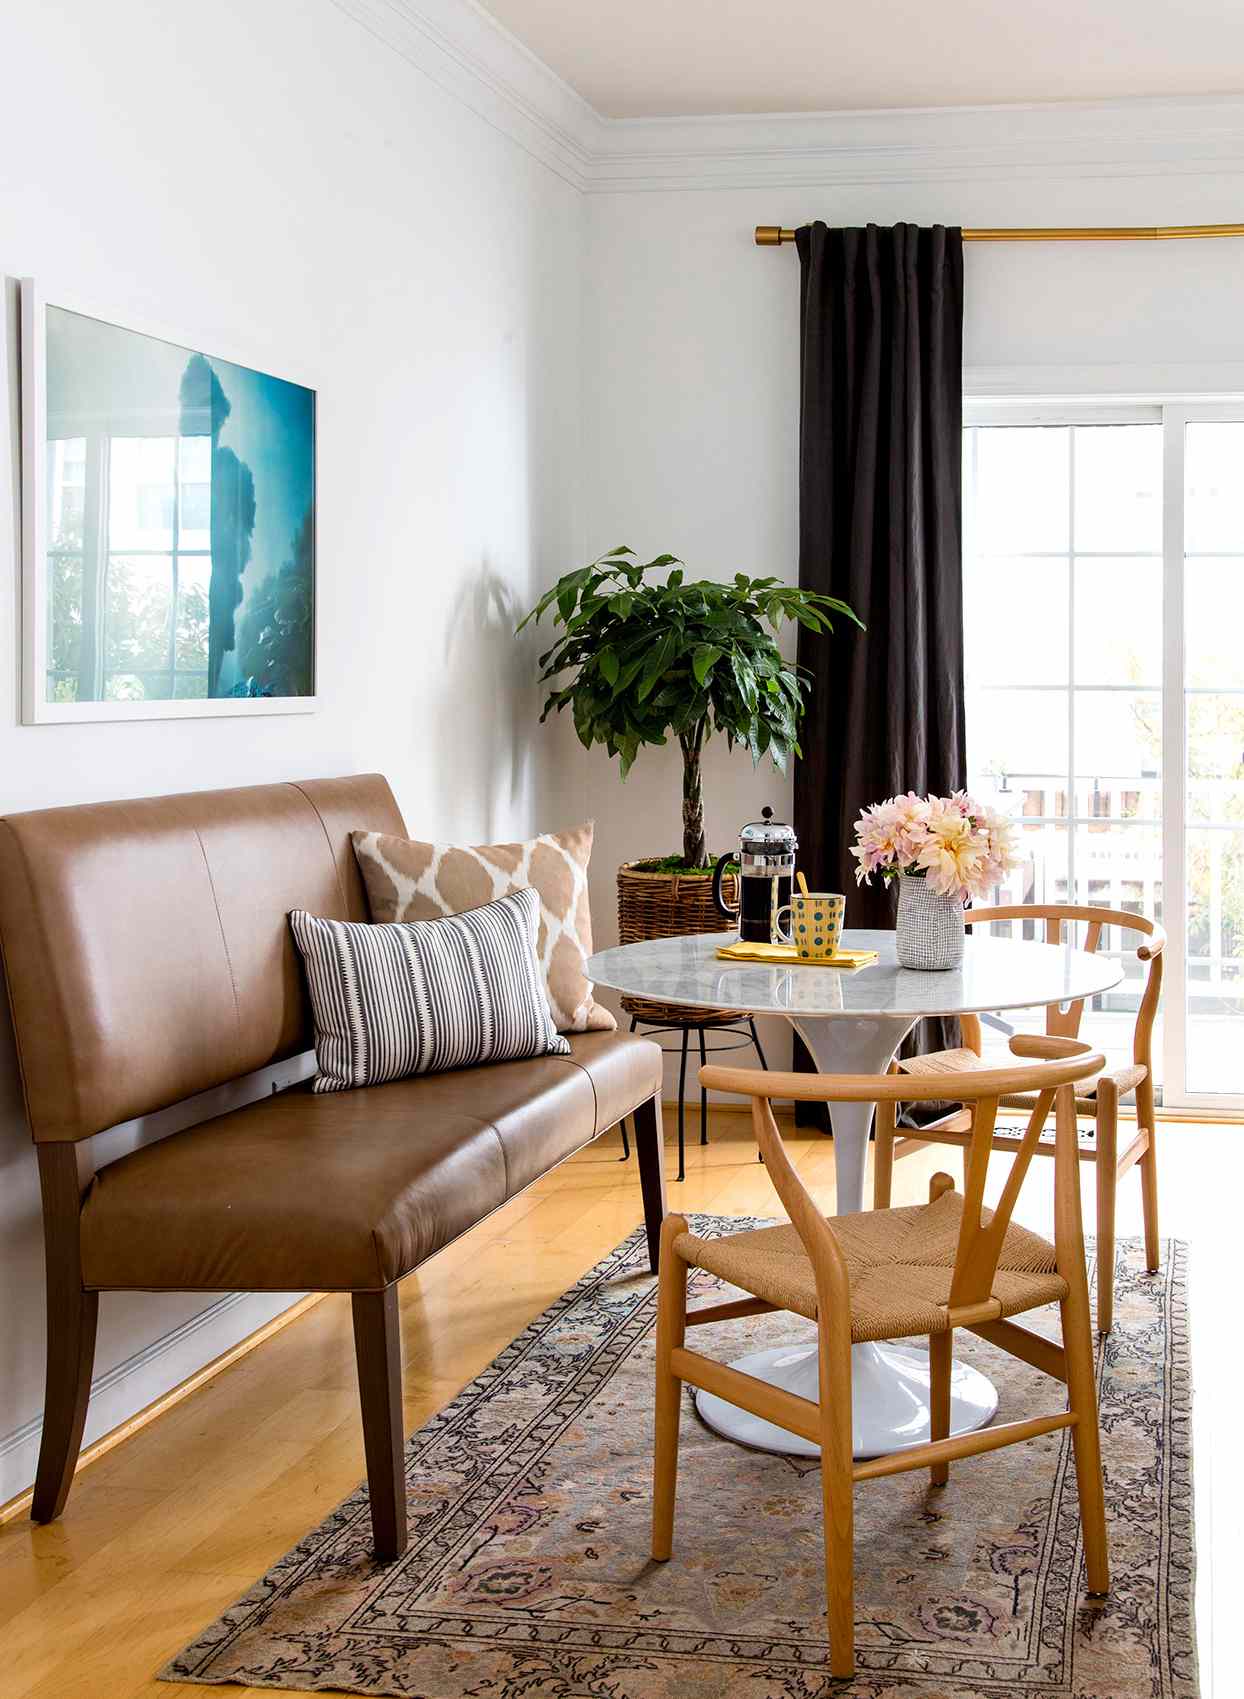 20 Small Dining Room Ideas to Make the Most of Your Space   Better ...